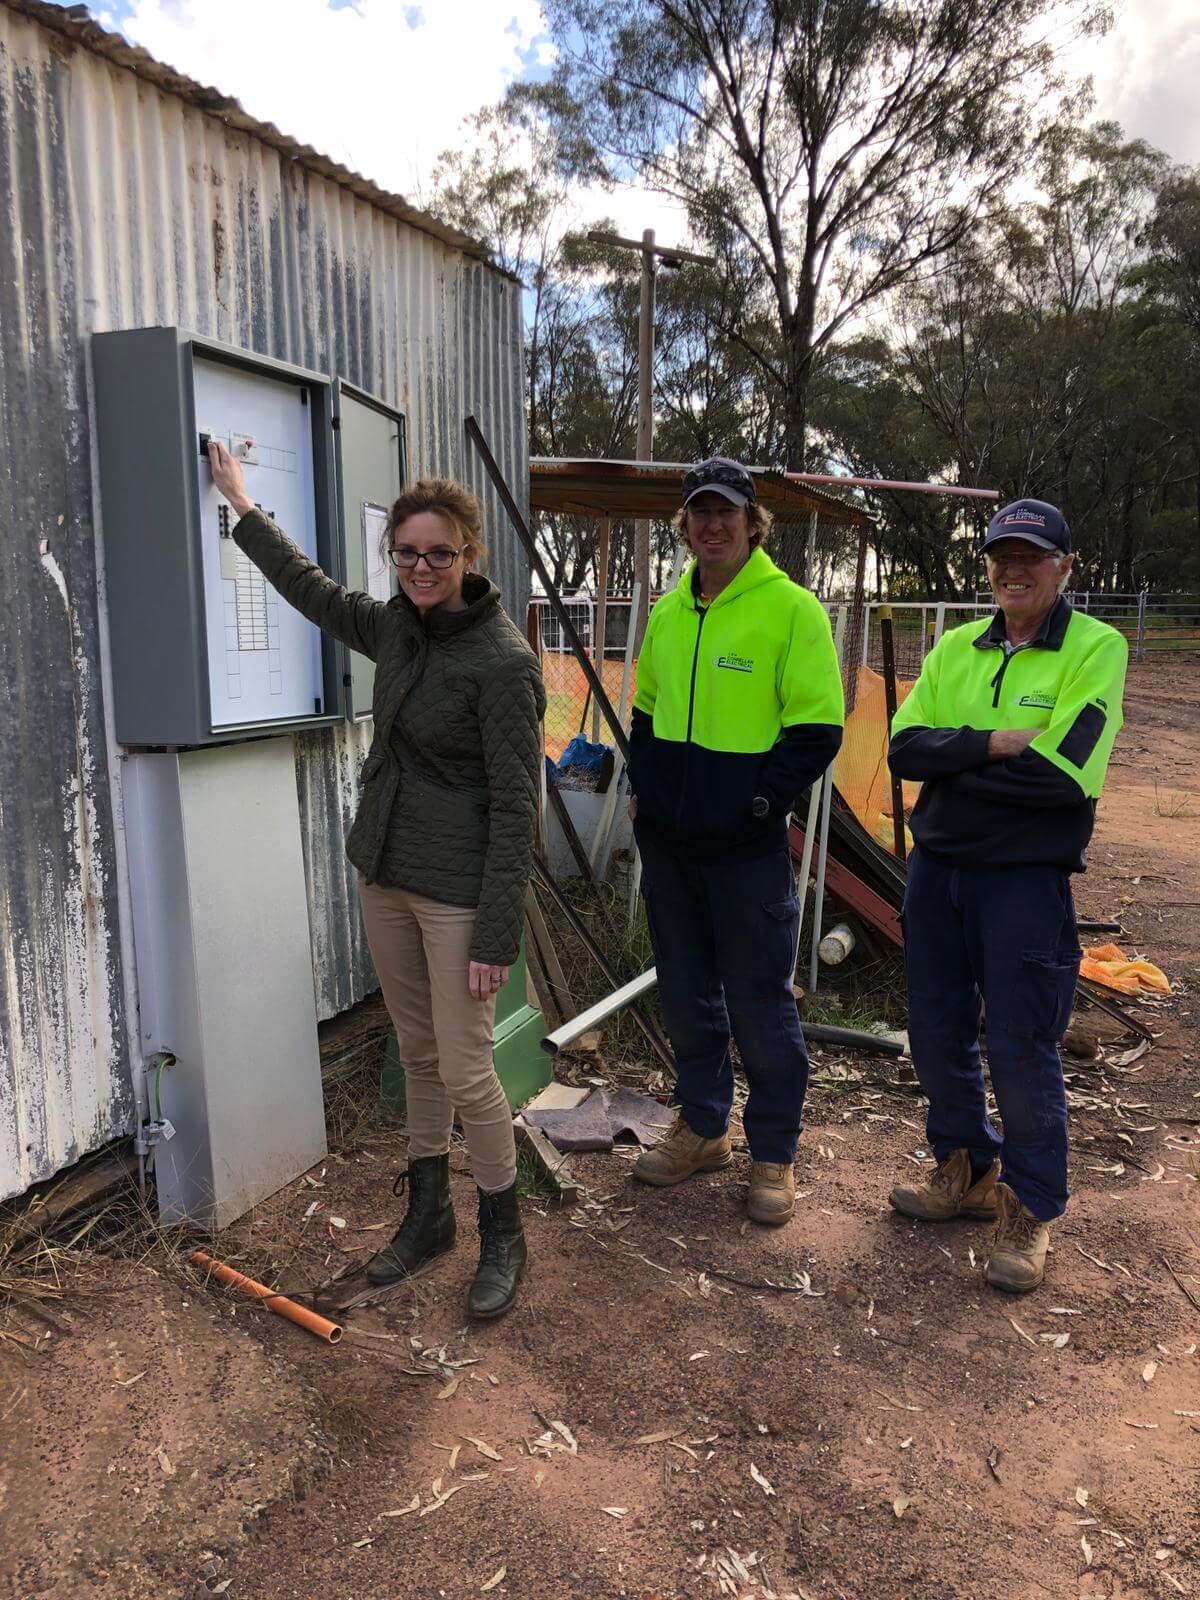 Steph Cooke MP with contractors Andrew and Garry Conlon at the rodeo ground. They stand in front of a new electrical box.